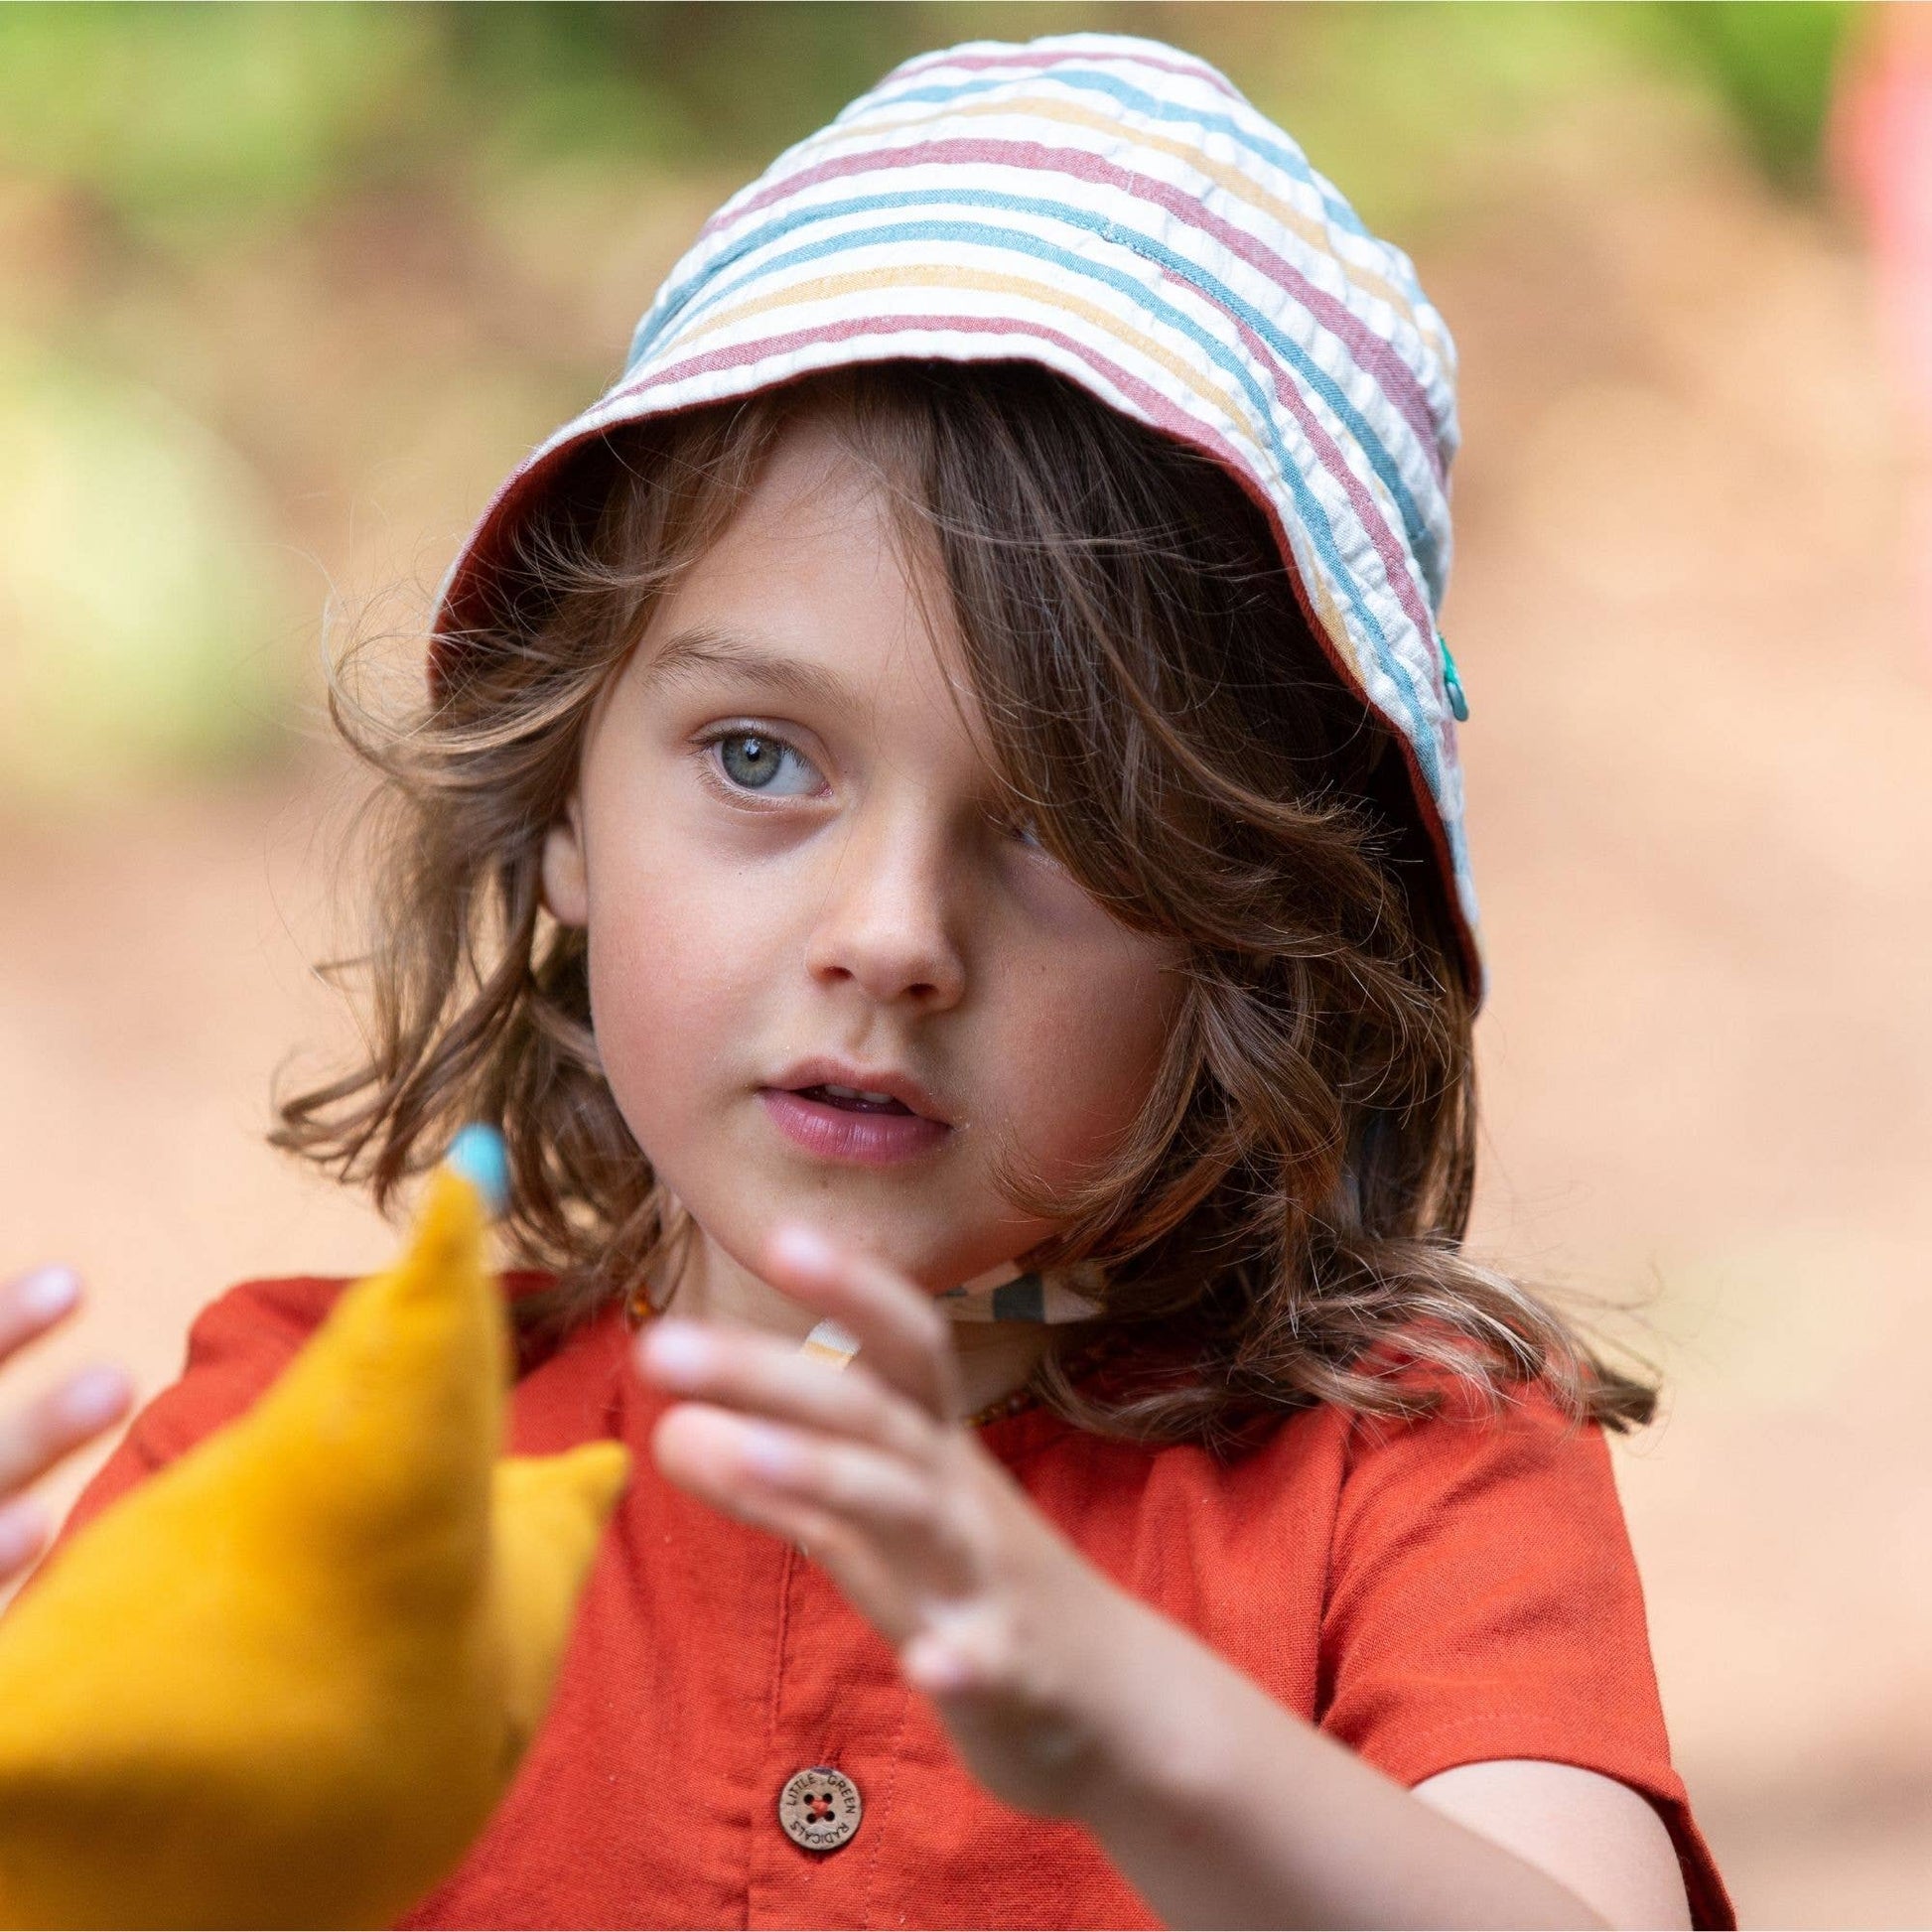 child holding a toy wearing an orange shirt and reversible striped sunhat